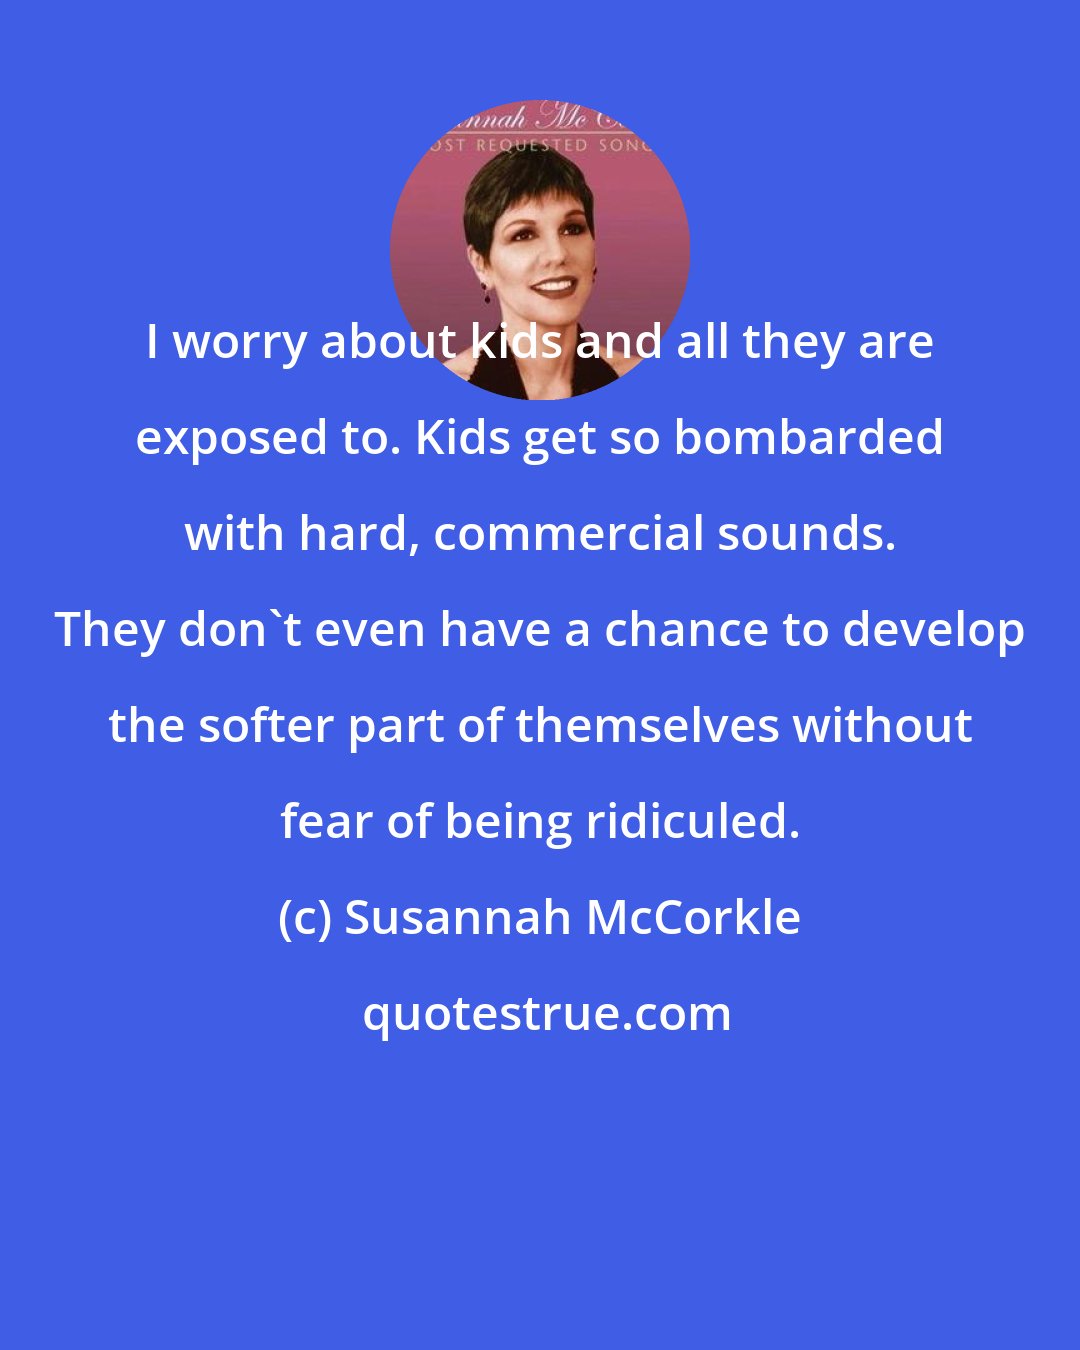 Susannah McCorkle: I worry about kids and all they are exposed to. Kids get so bombarded with hard, commercial sounds. They don't even have a chance to develop the softer part of themselves without fear of being ridiculed.